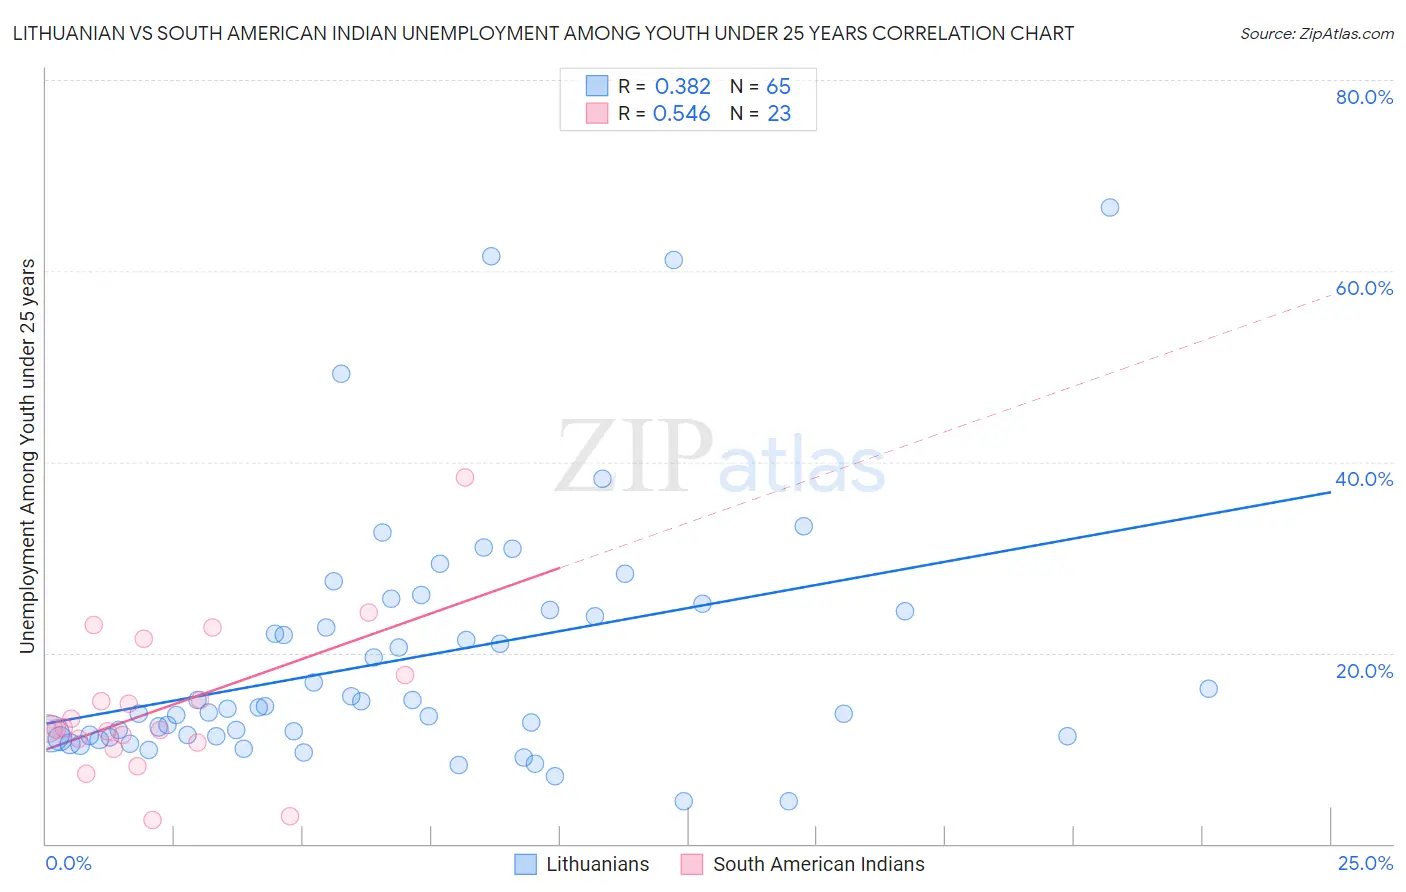 Lithuanian vs South American Indian Unemployment Among Youth under 25 years